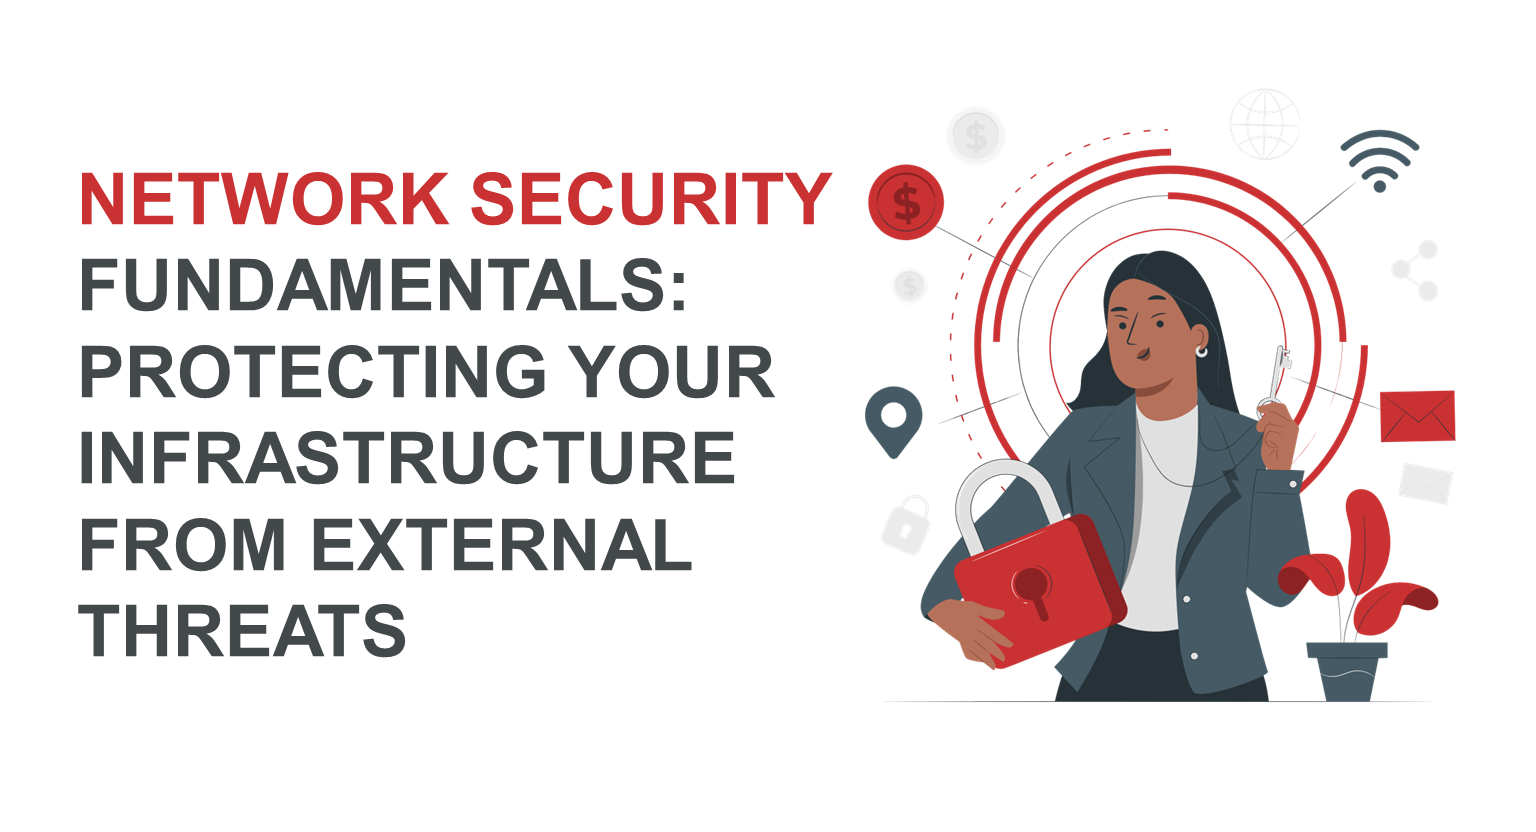 Network Security Fundamentals: Protecting Your Infrastructure from External Threats